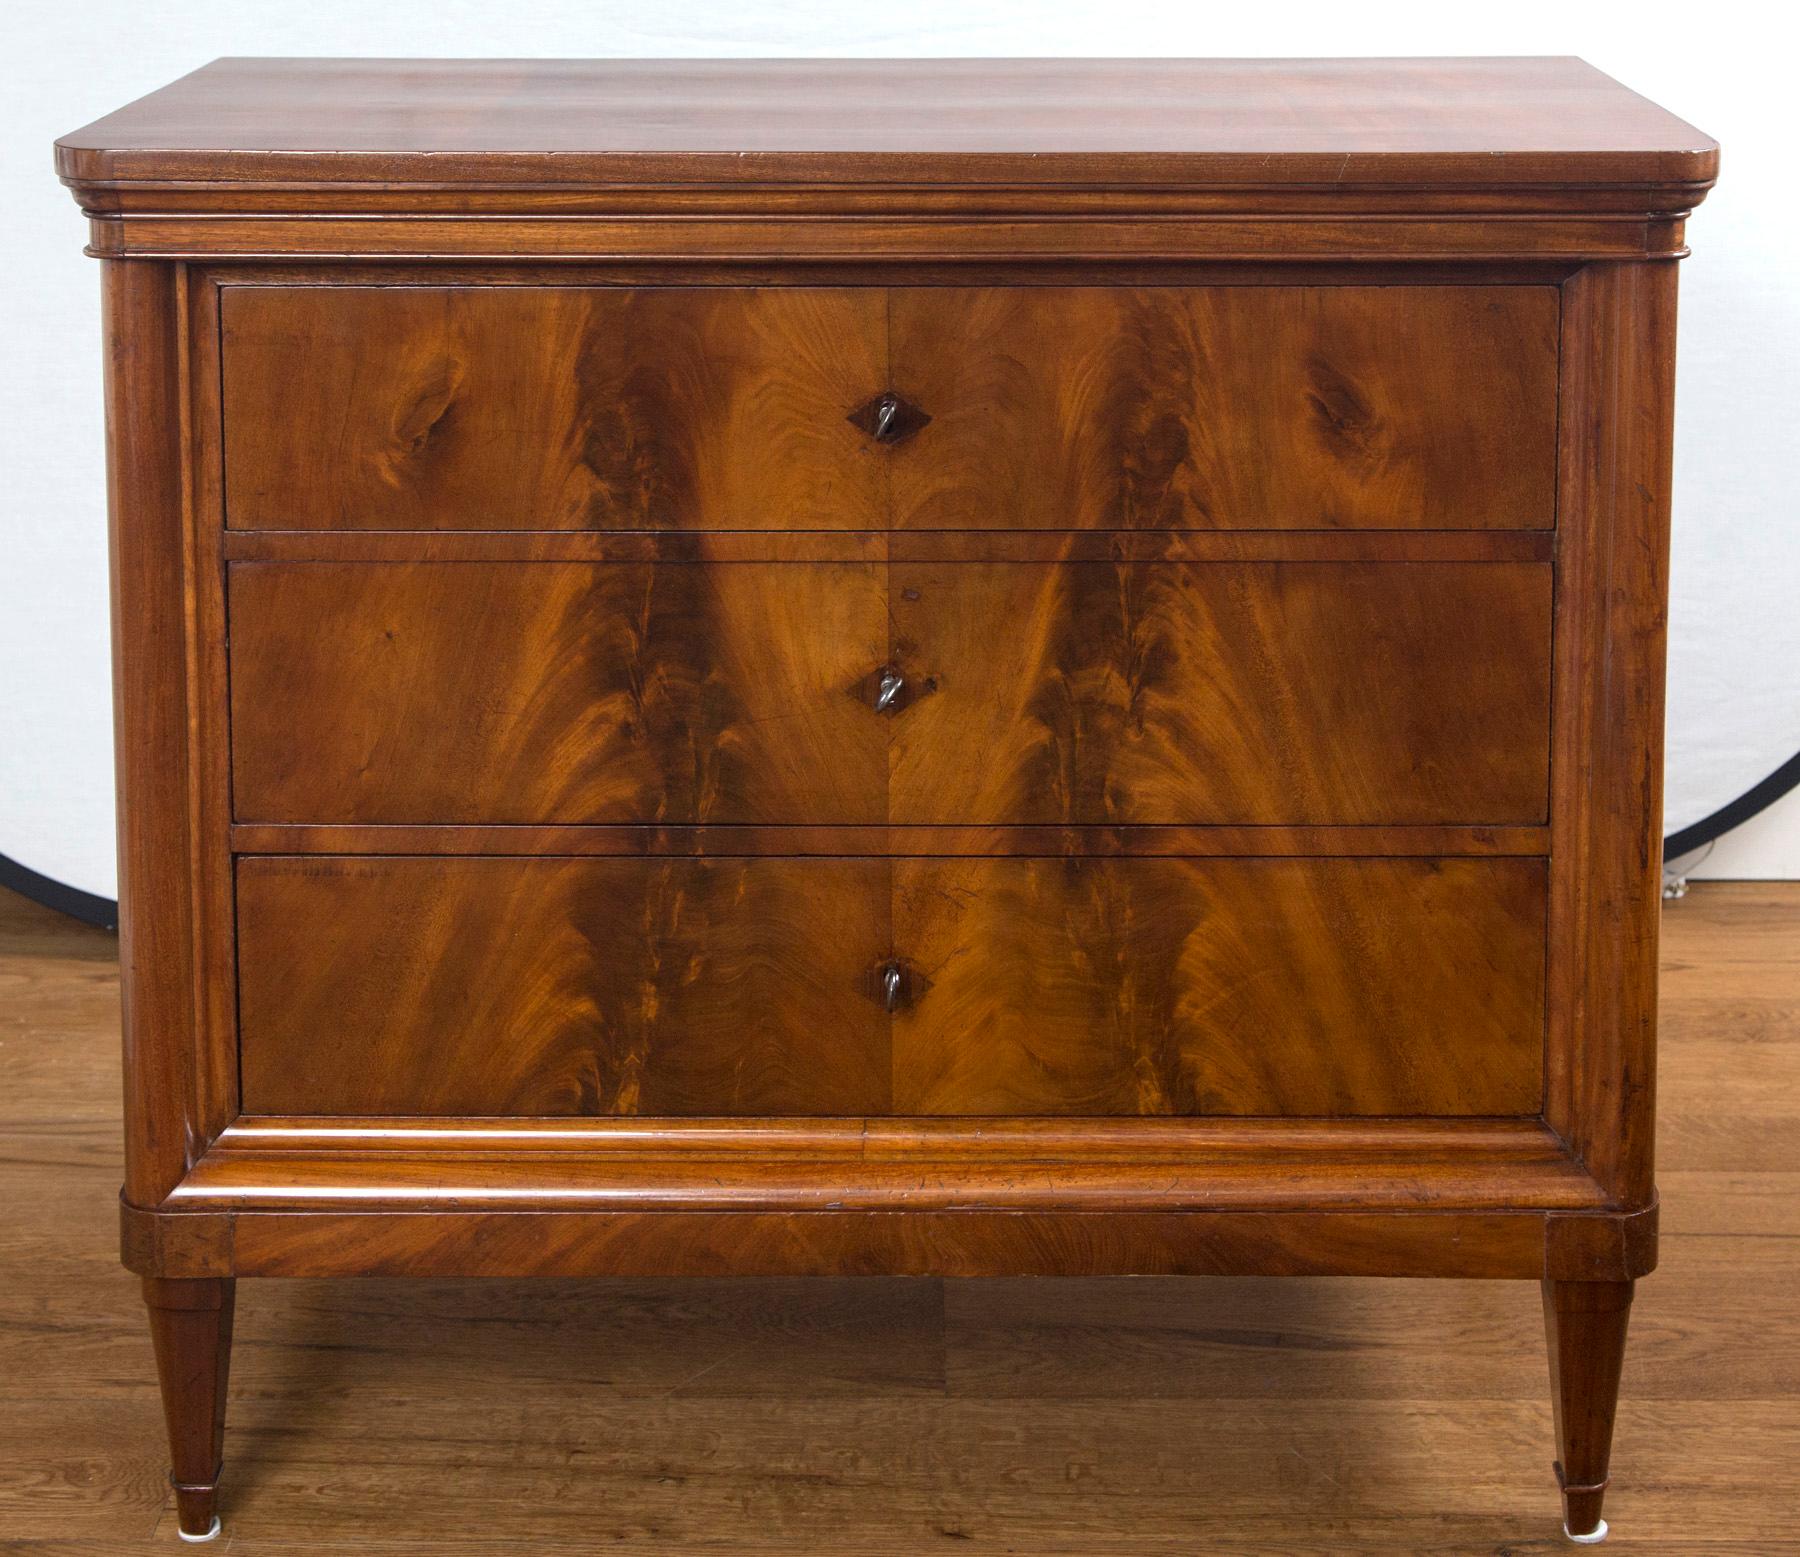 Fine Pair of 19th Century Continental Chest of Drawers (Biedermeier)